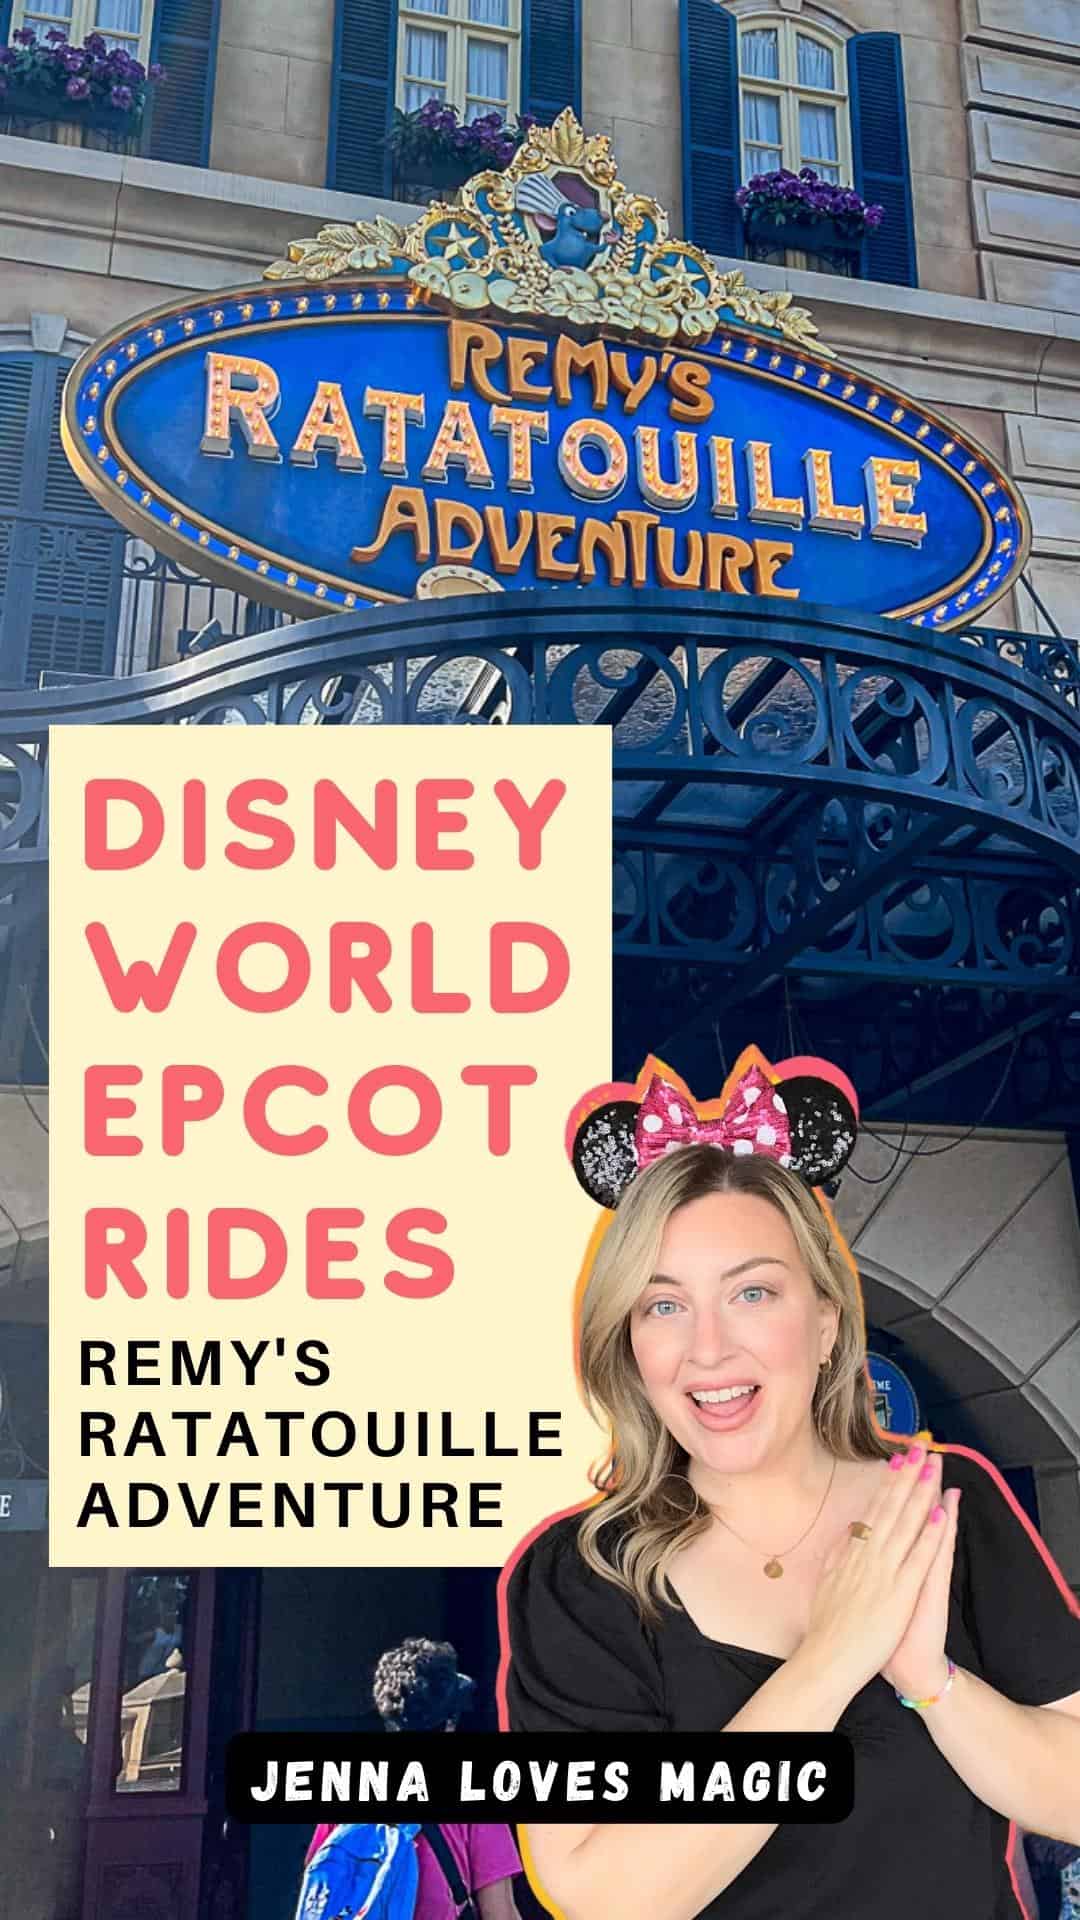 Disney World Remys Ratatouille Adventure Ride Details with text overlay and Jenna Loves Magic logo